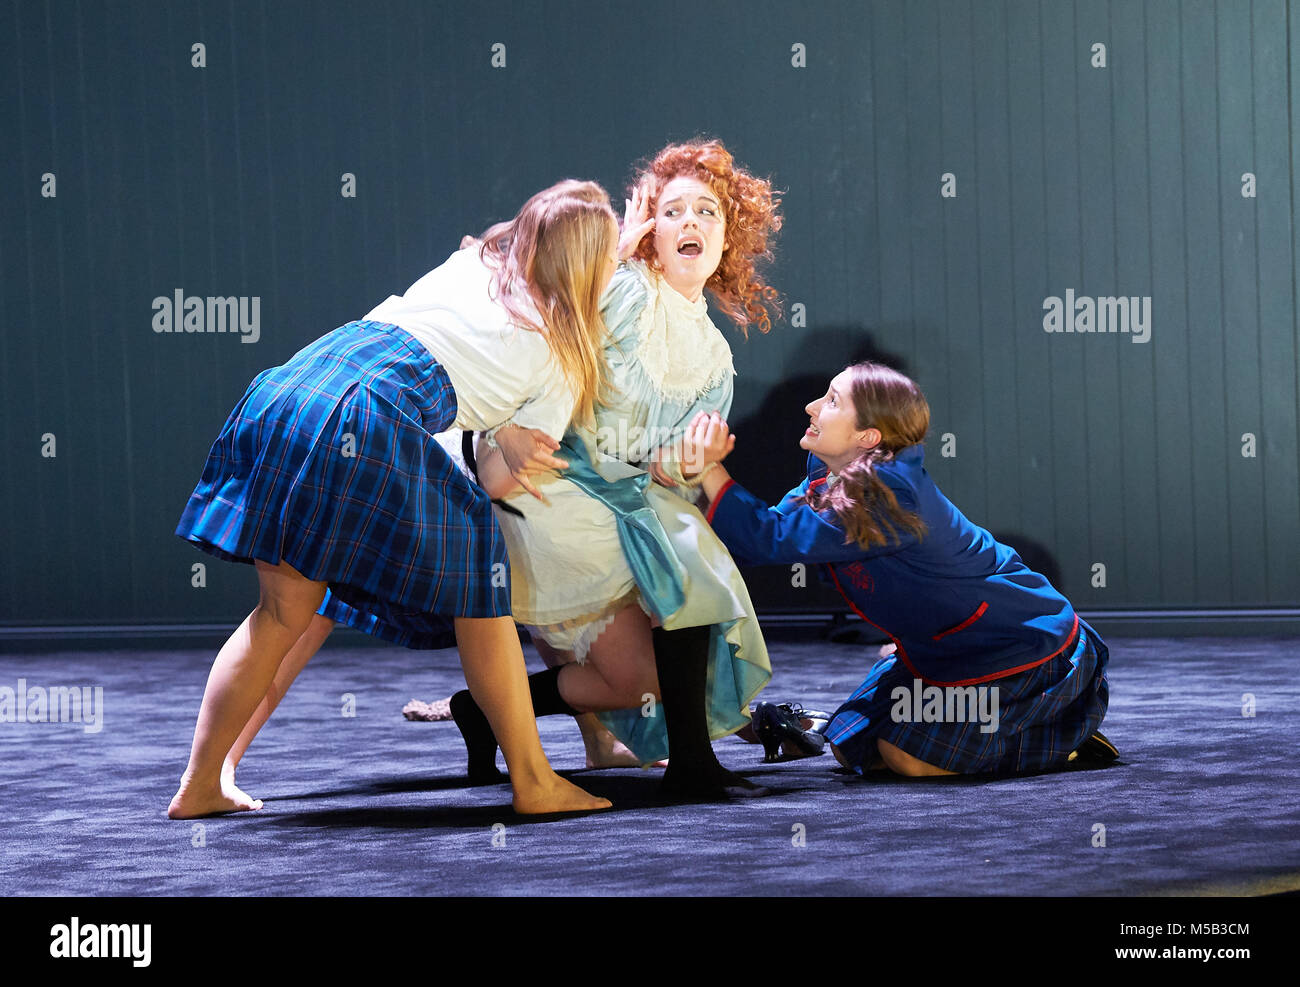 London, UK. 21st February, 2018.  Malthouse Theatre/Black Swan State Theatre present Picnic at Hanging Rock at the Barbican Theatre, London. 21st February 2018.  Cast  Harriet Gordon-Anderson Arielle Gray Amber McMahon Elizabeth Nabben Nikki Shiels  Directed by Matthew Lutton Credit: Thomas Bowles/Alamy Live News Stock Photo